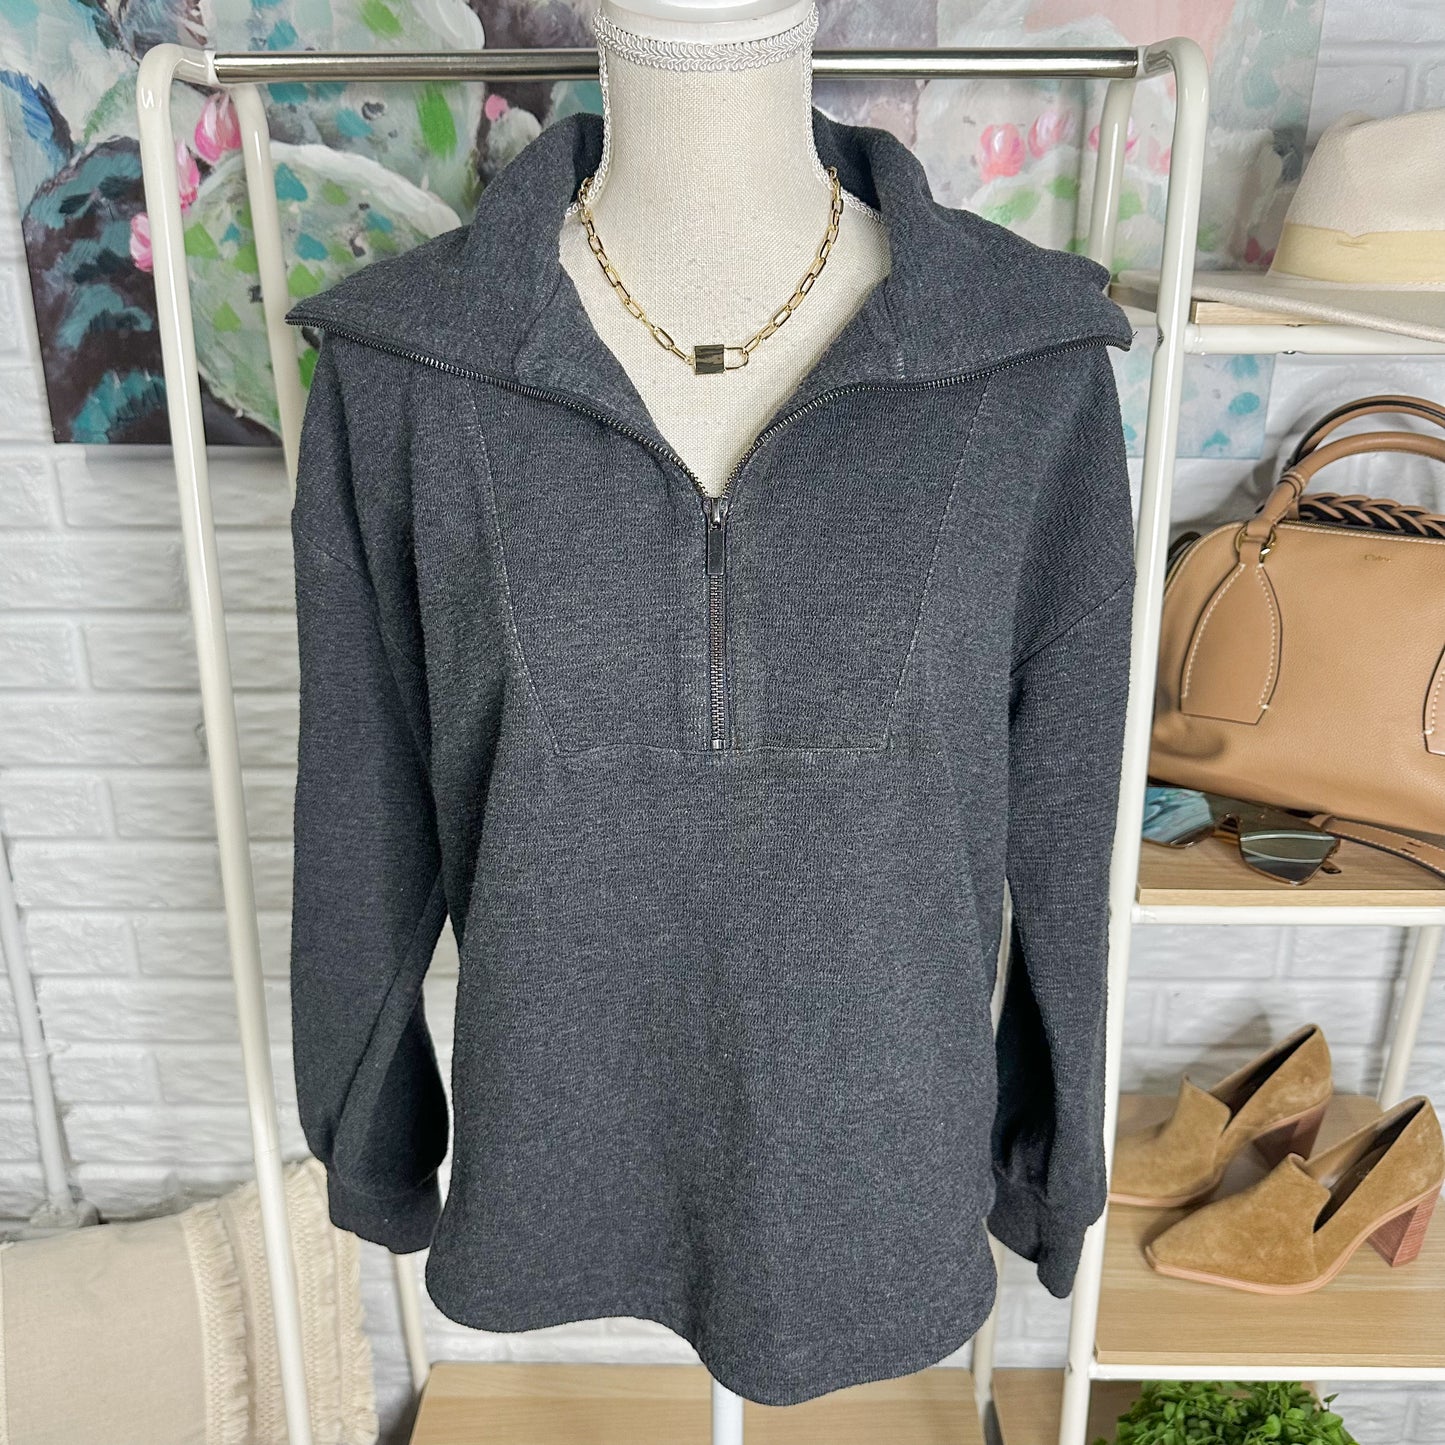 Lou & Grey Textured Zip Shirttail Top Size Small